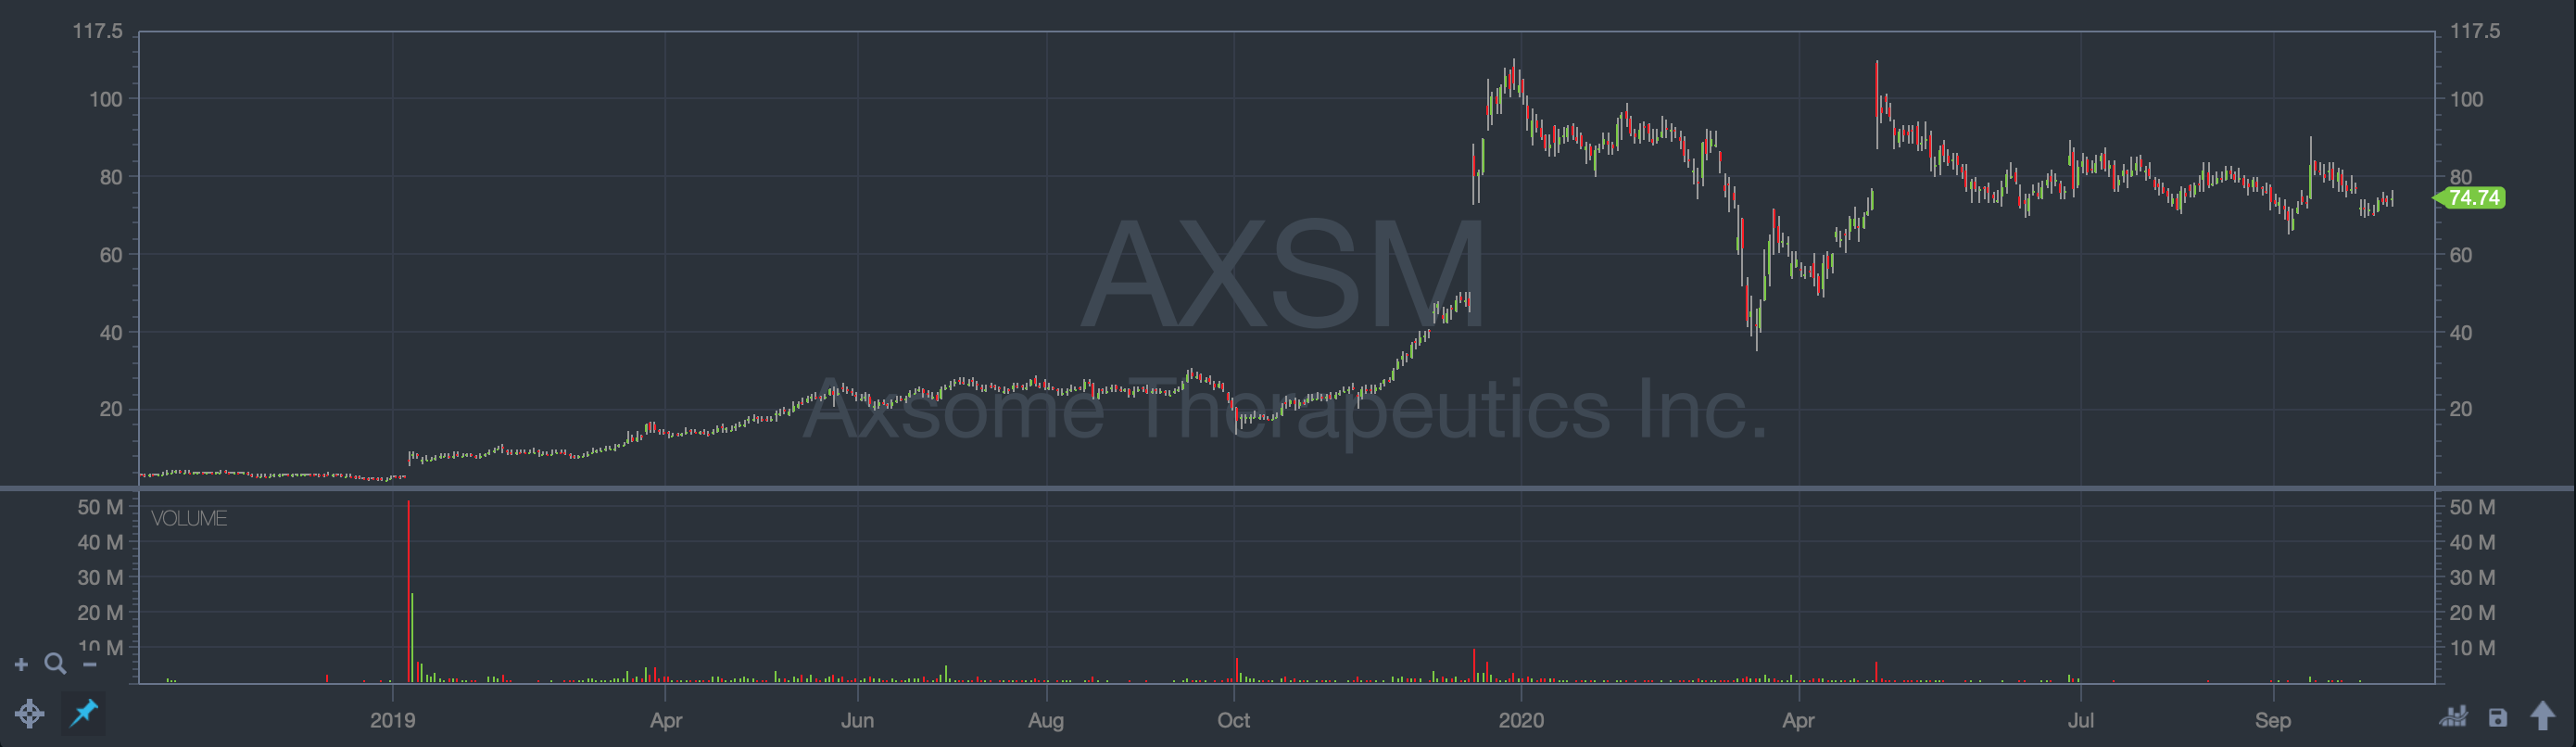 most successful penny stocks in history axsm